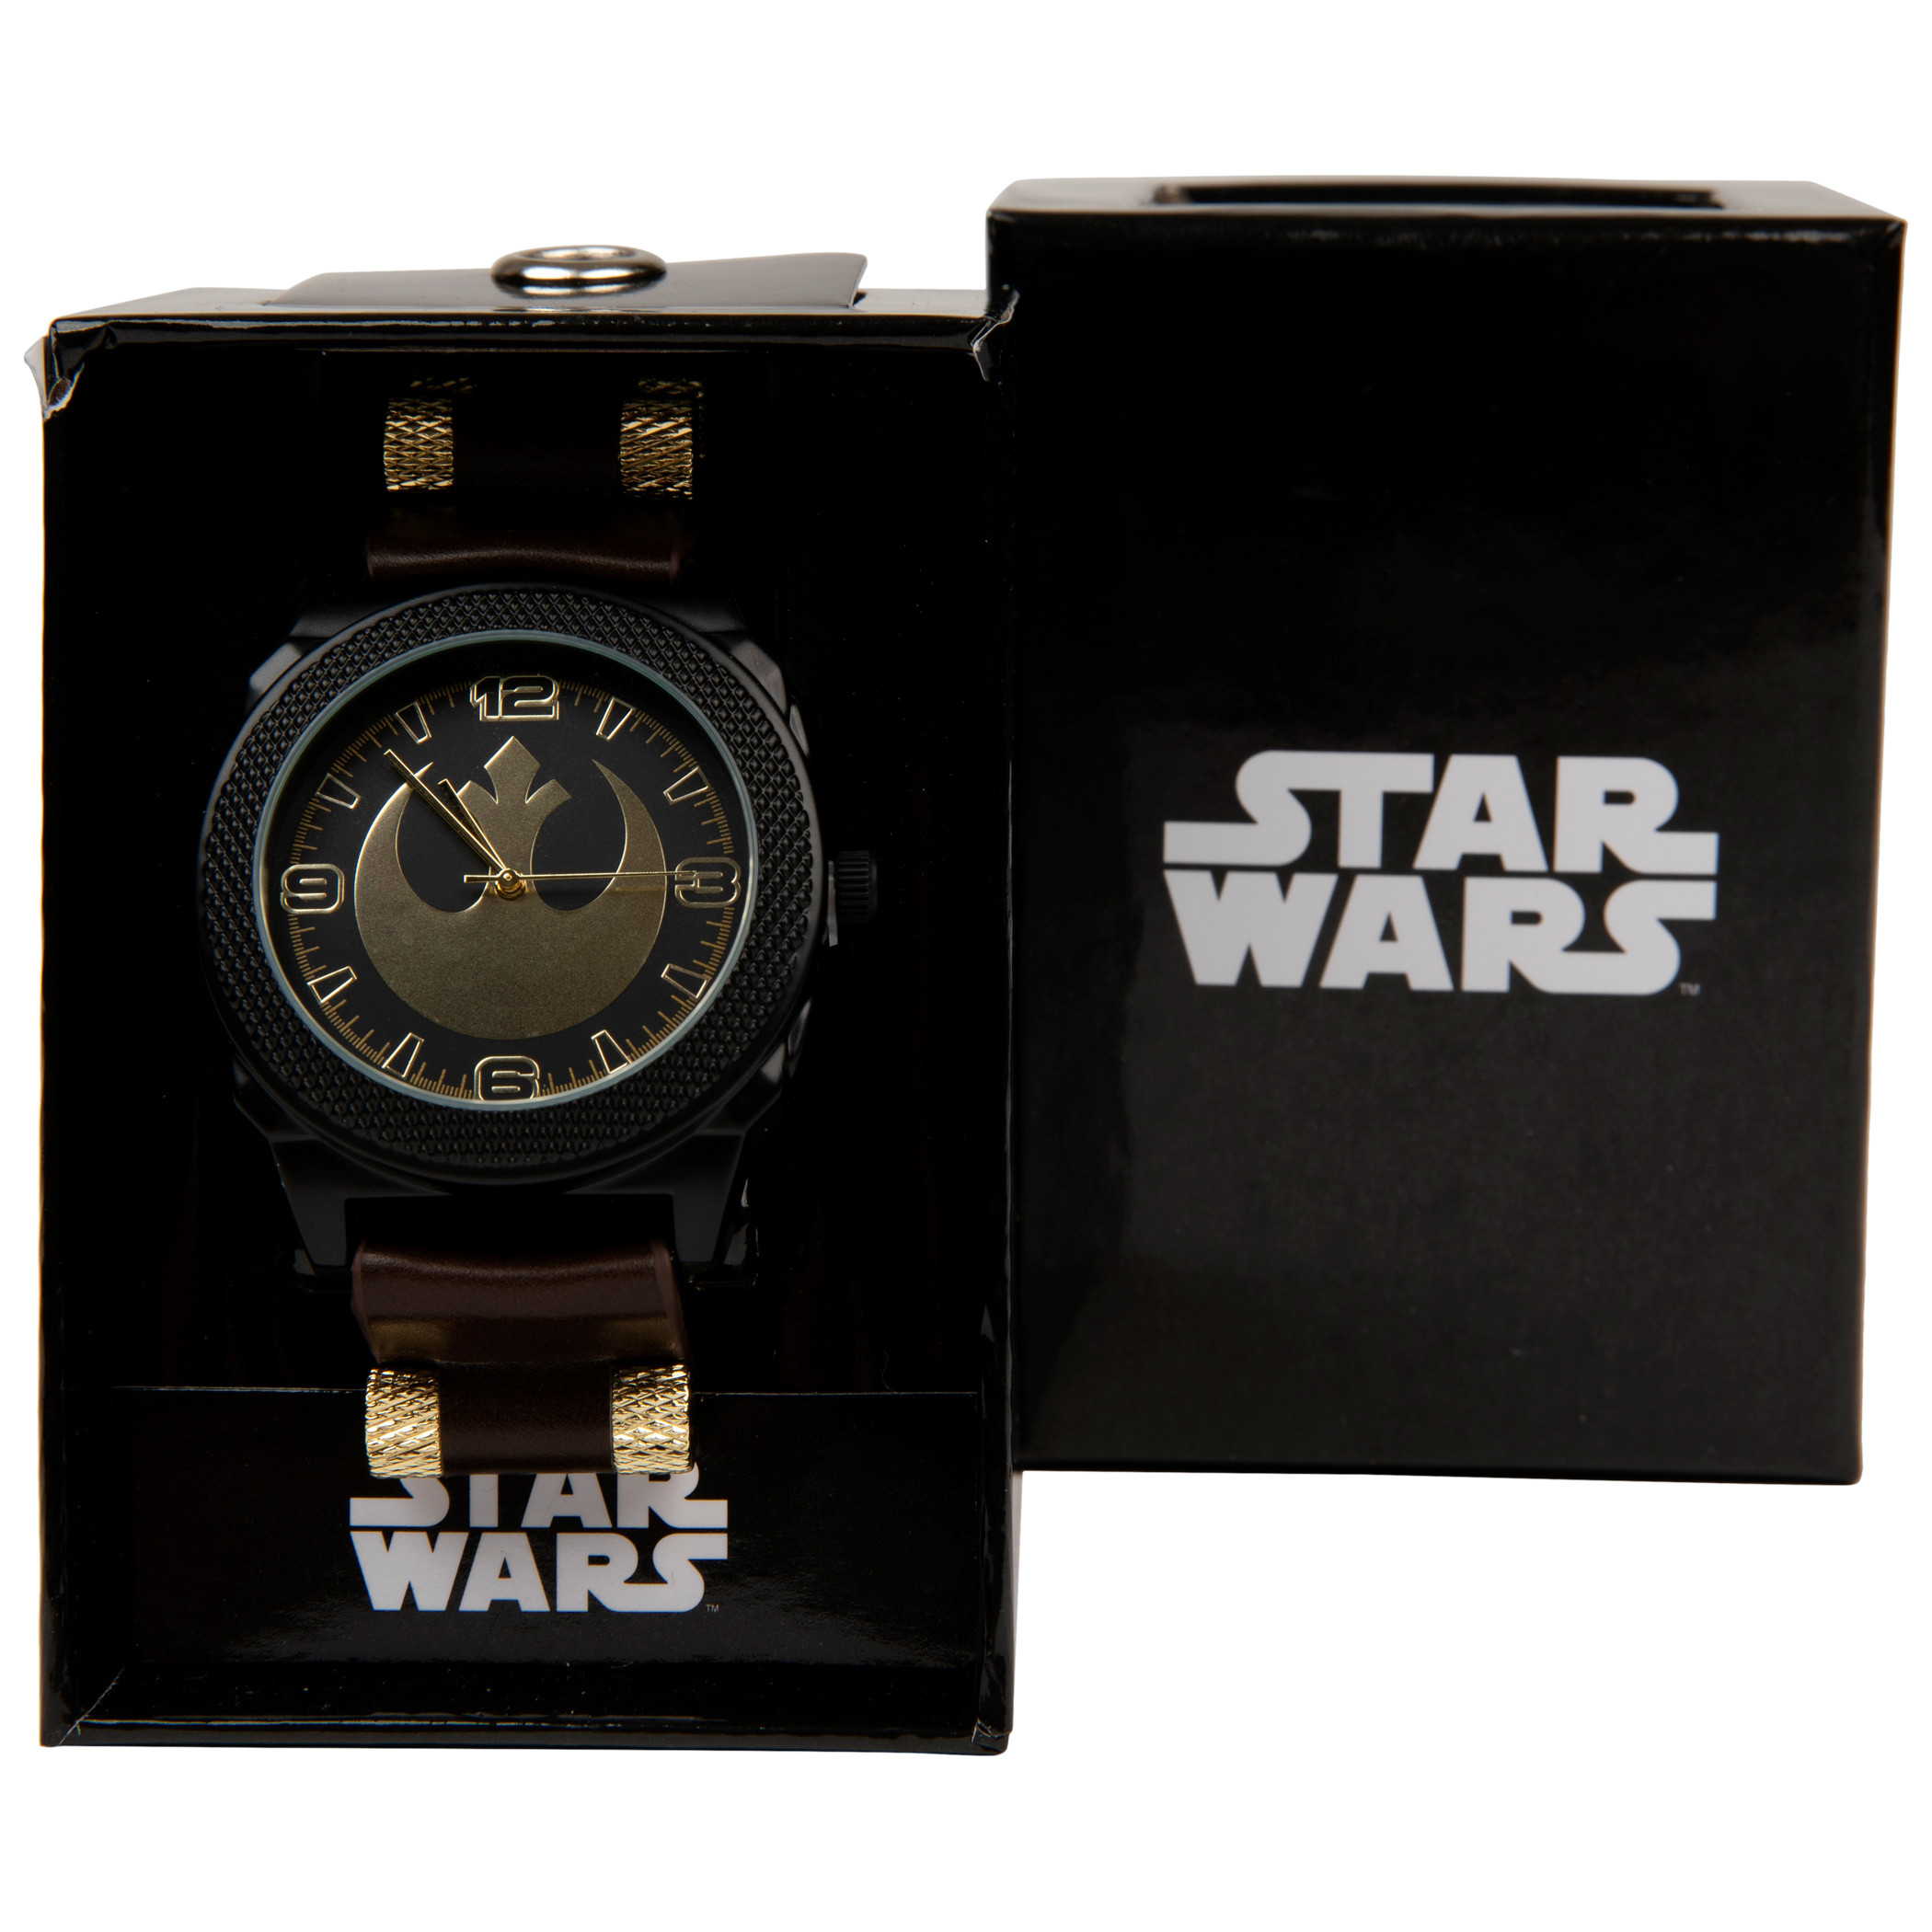 Star Wars Rebel Alliance Symbol Watch with Silicone Band